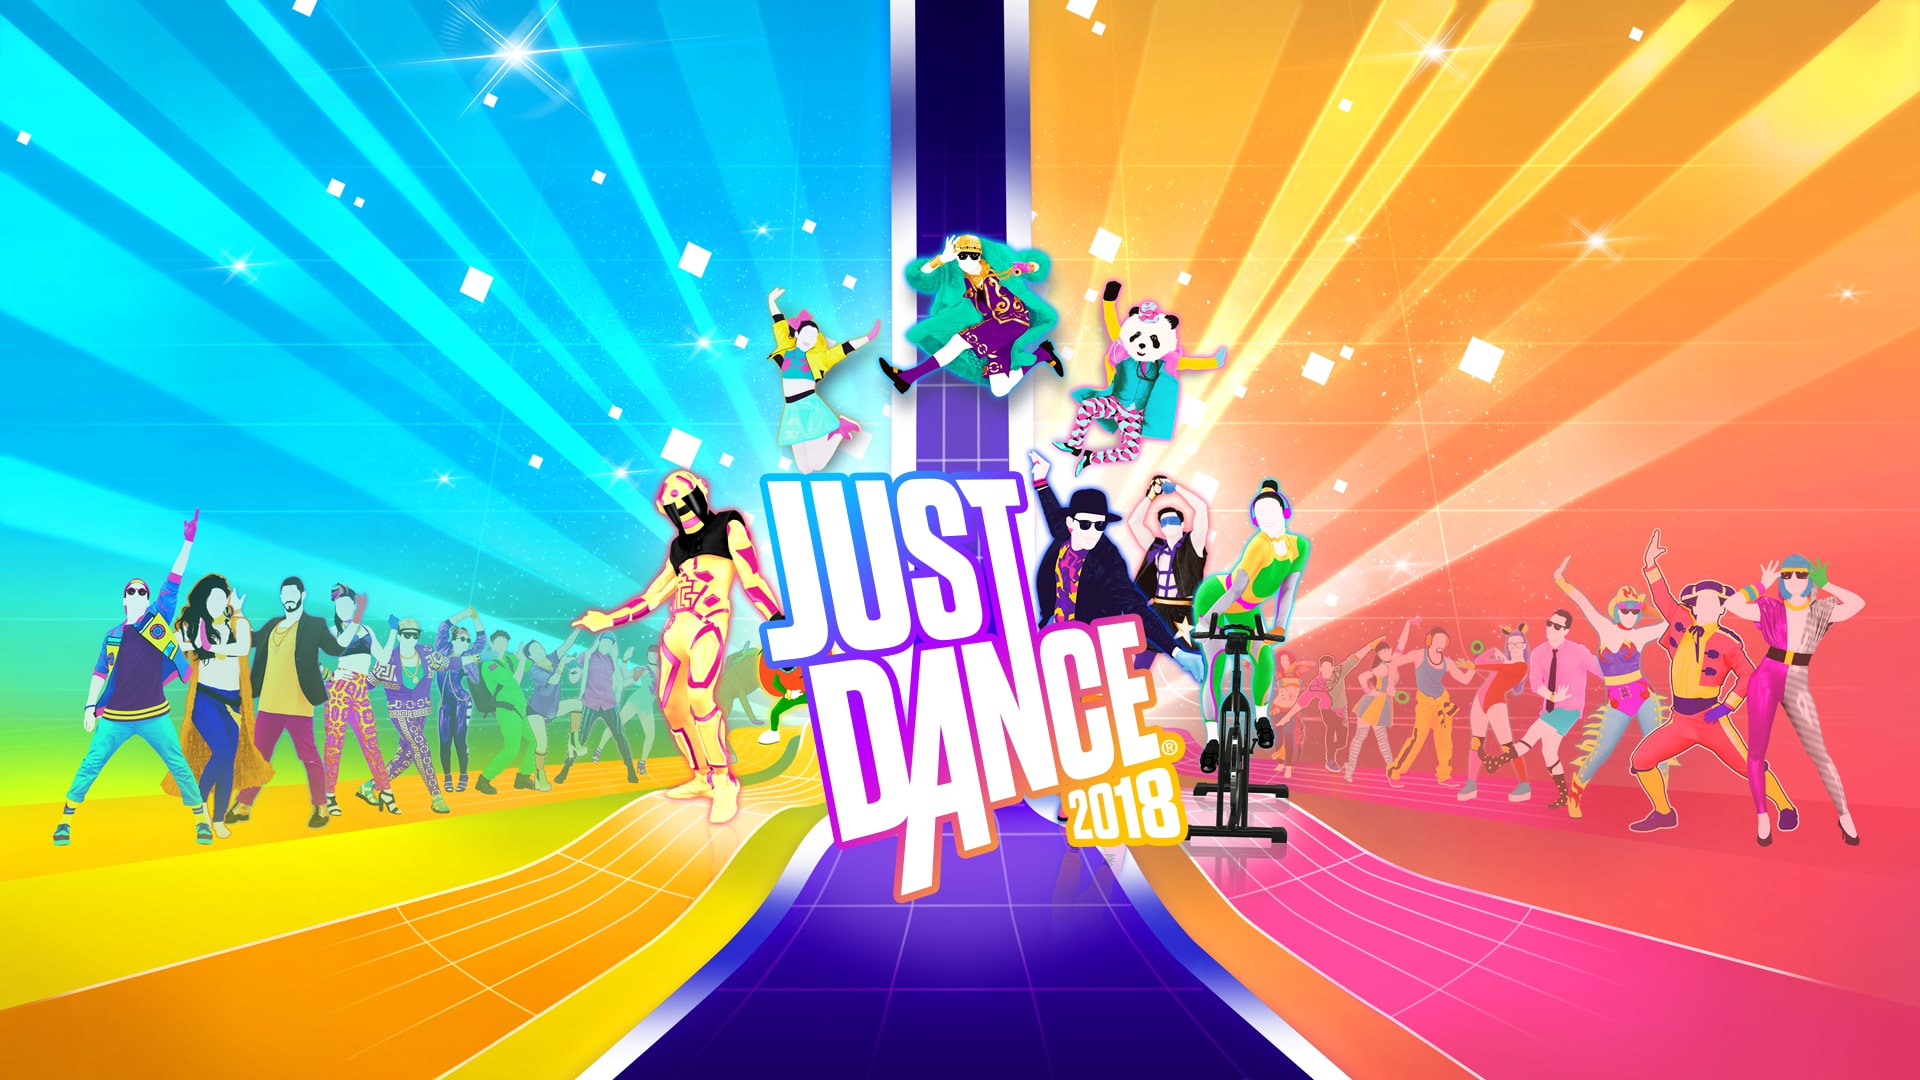 Just Dance 2018 (PS4) PlayStation 4